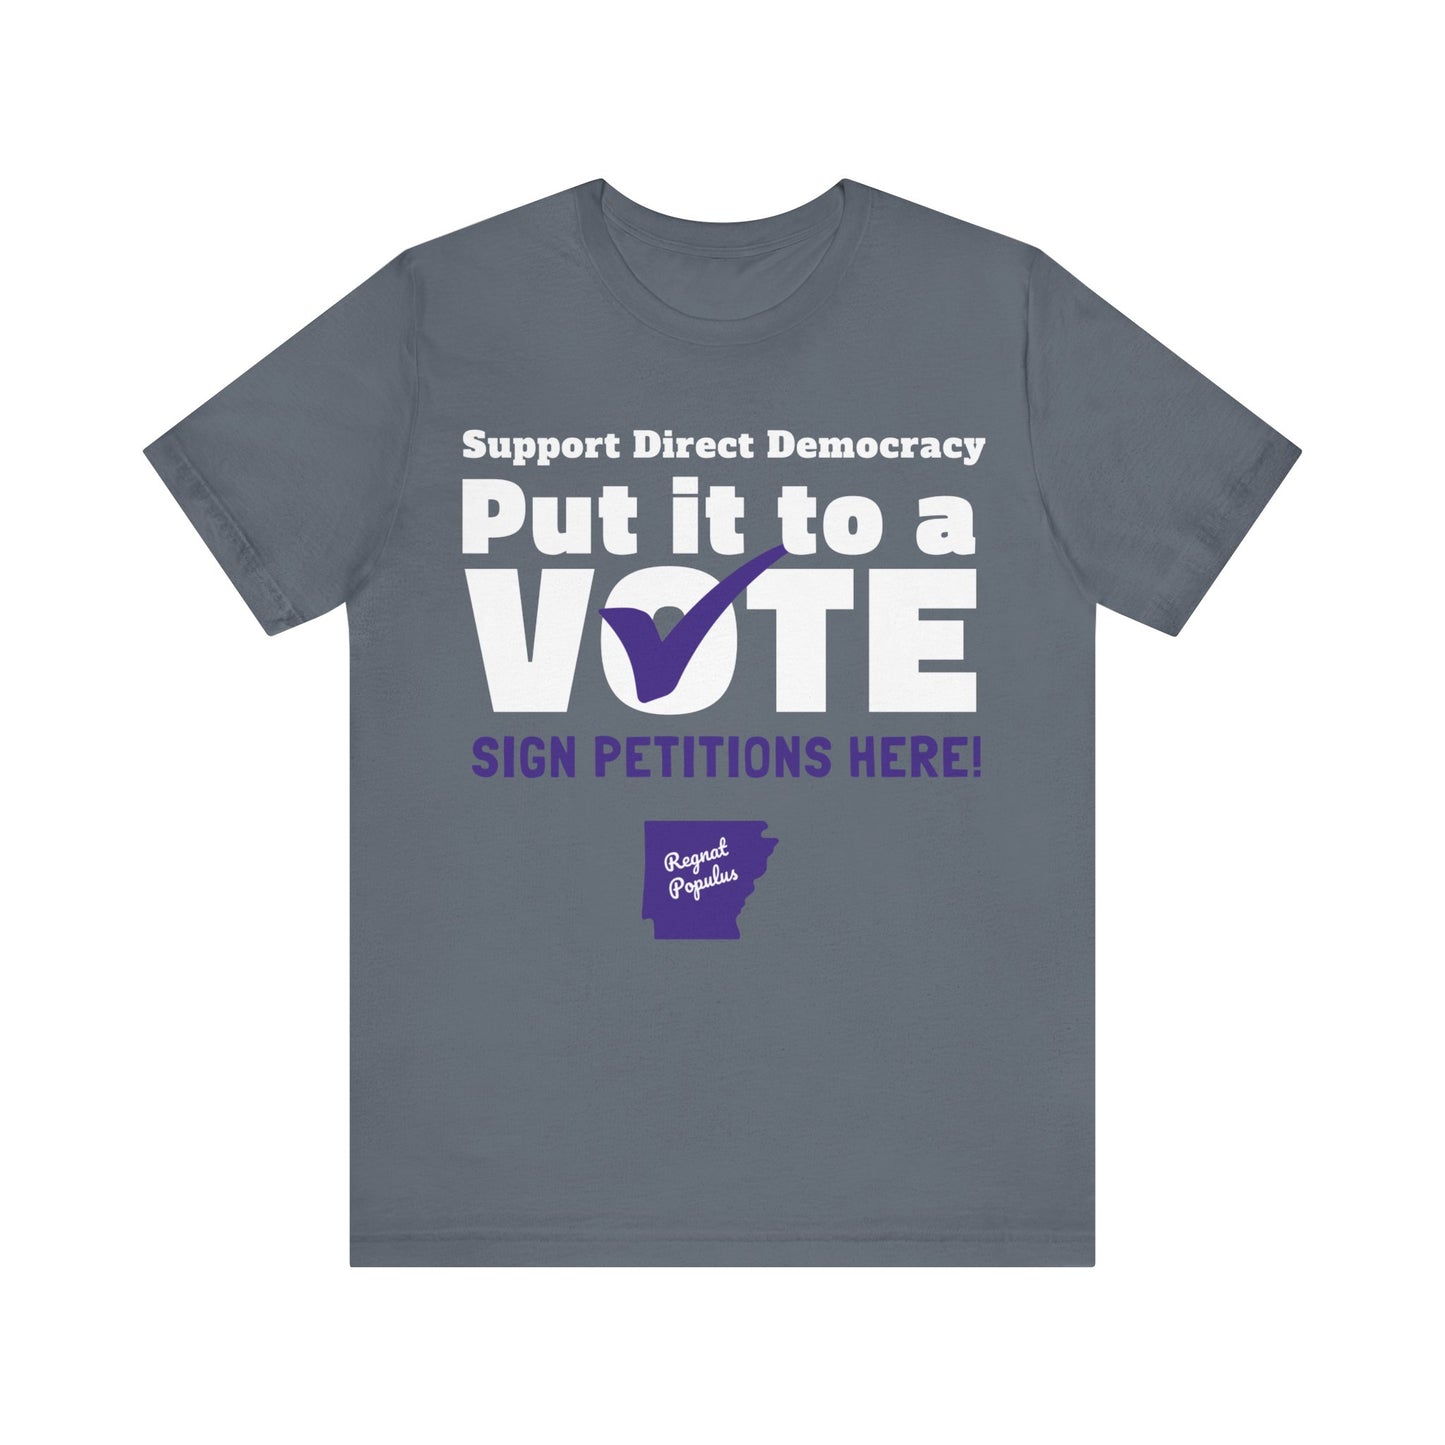 Support Direct Democracy Put It To A Vote Sign Petition Here Shirt, Regnat Populus Shirt, Politics Shirt